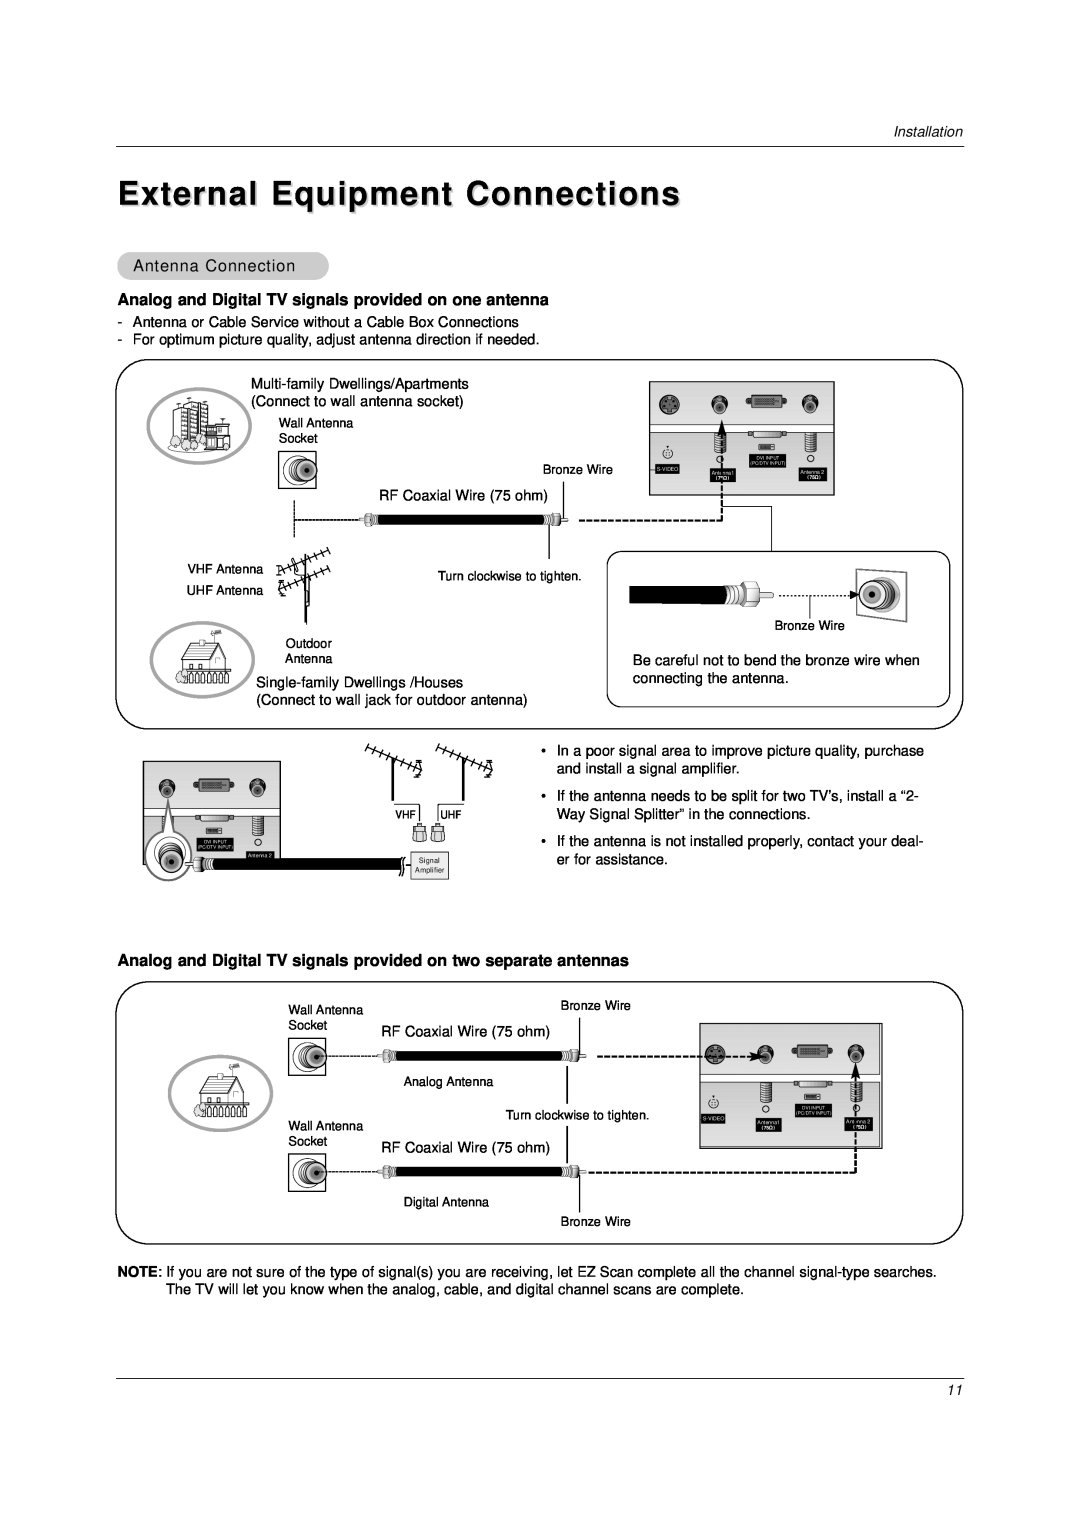 LG Electronics DU-37LZ30 owner manual External Equipment Connections, Antenna Connection, er for assistance 